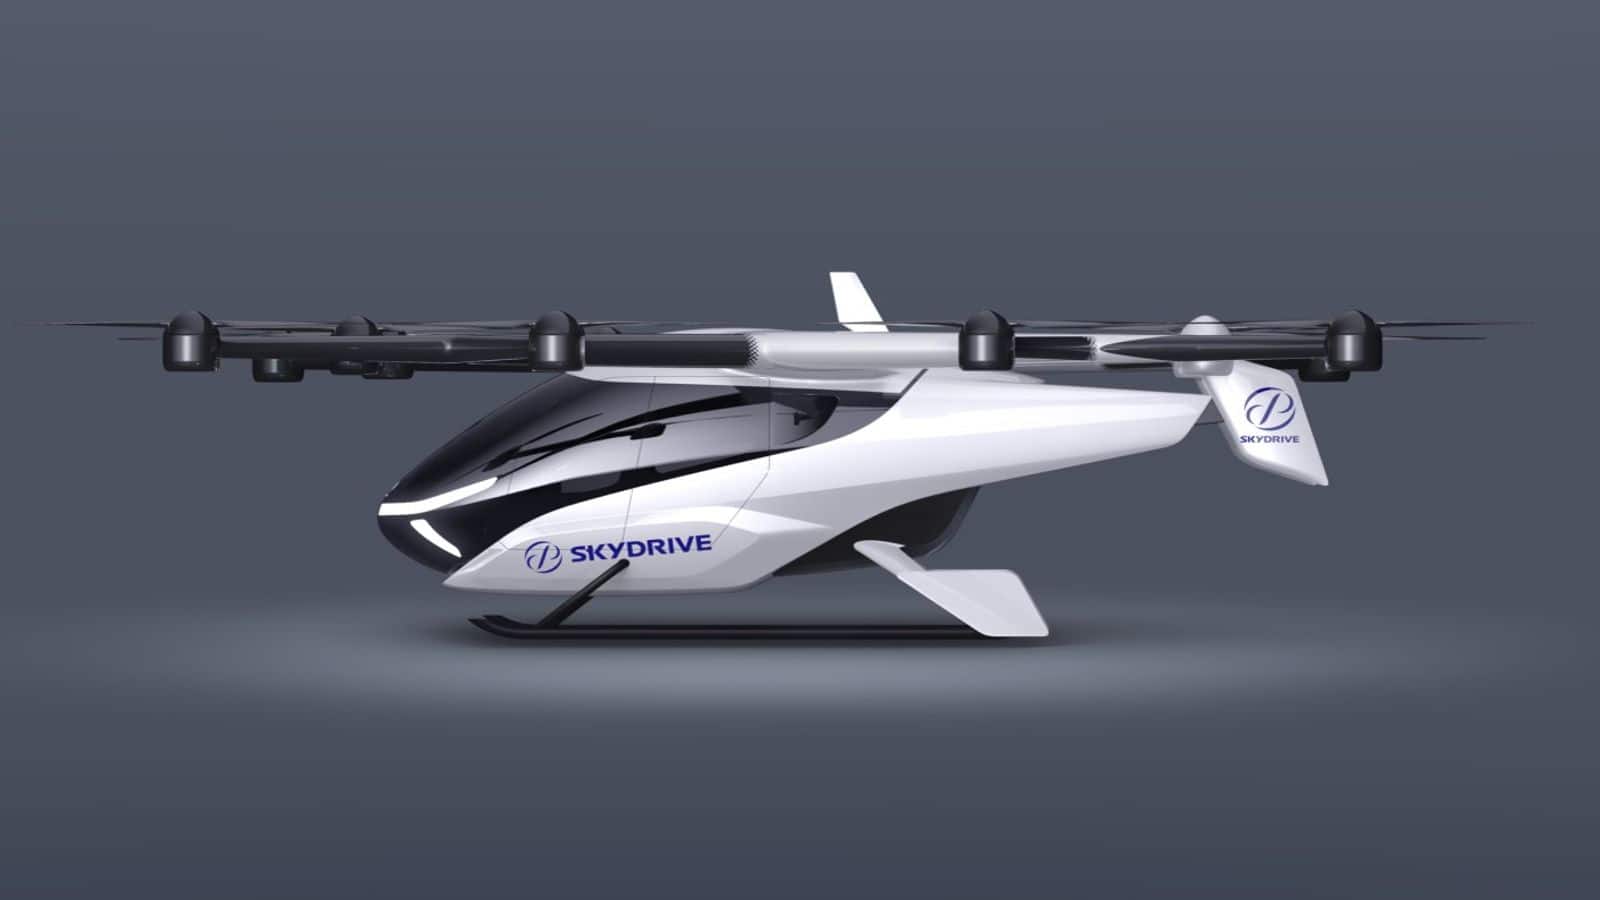 Suzuki begins production of its first-ever flying car